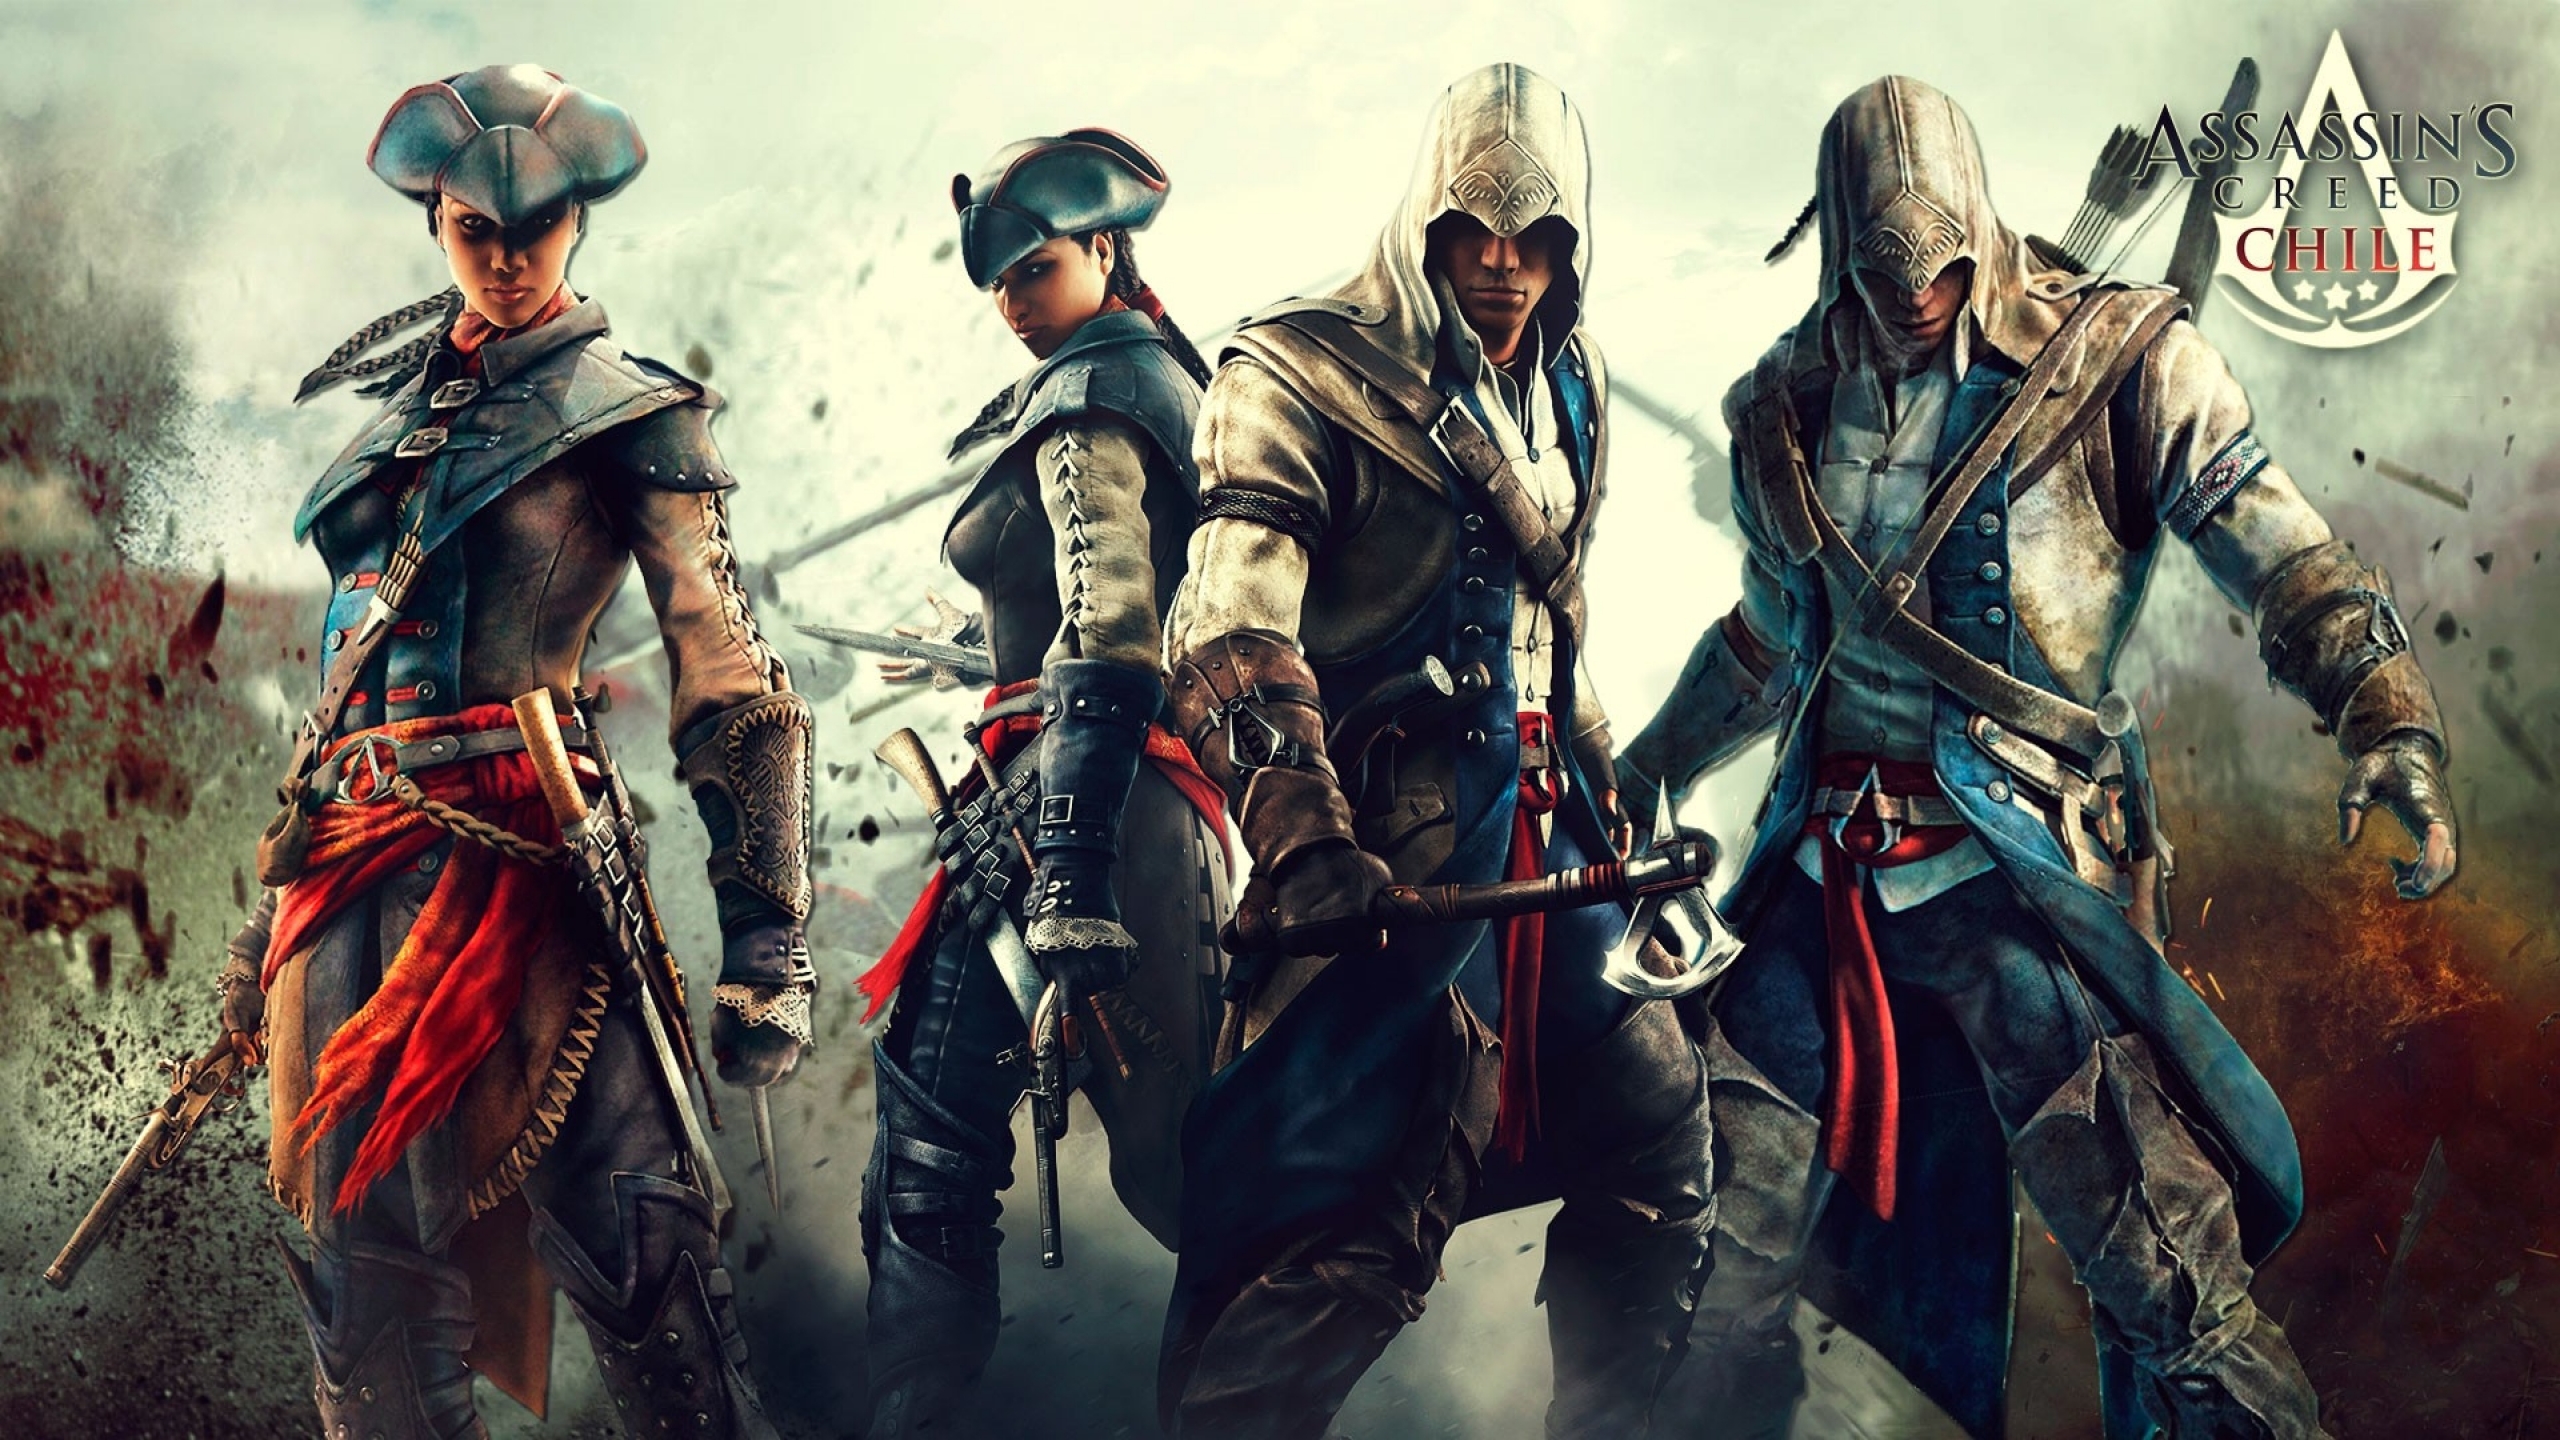 Mobile wallpaper assassin's creed iii, video game, assassin's creed